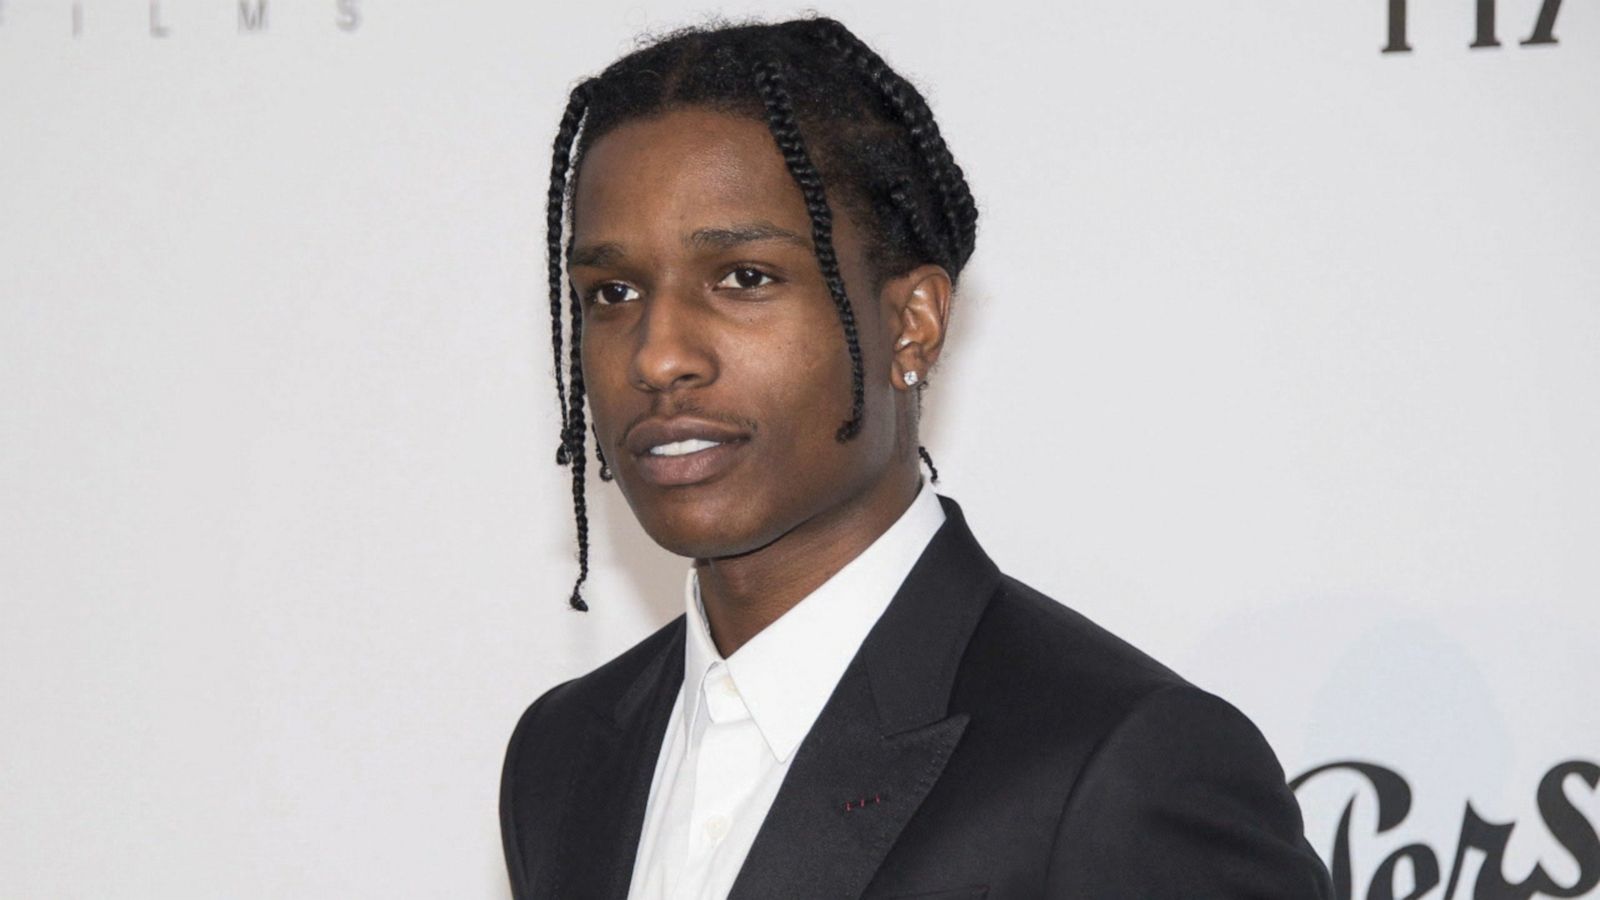 A$AP Rocky charged with assault in Sweden brawl - Good Morning America